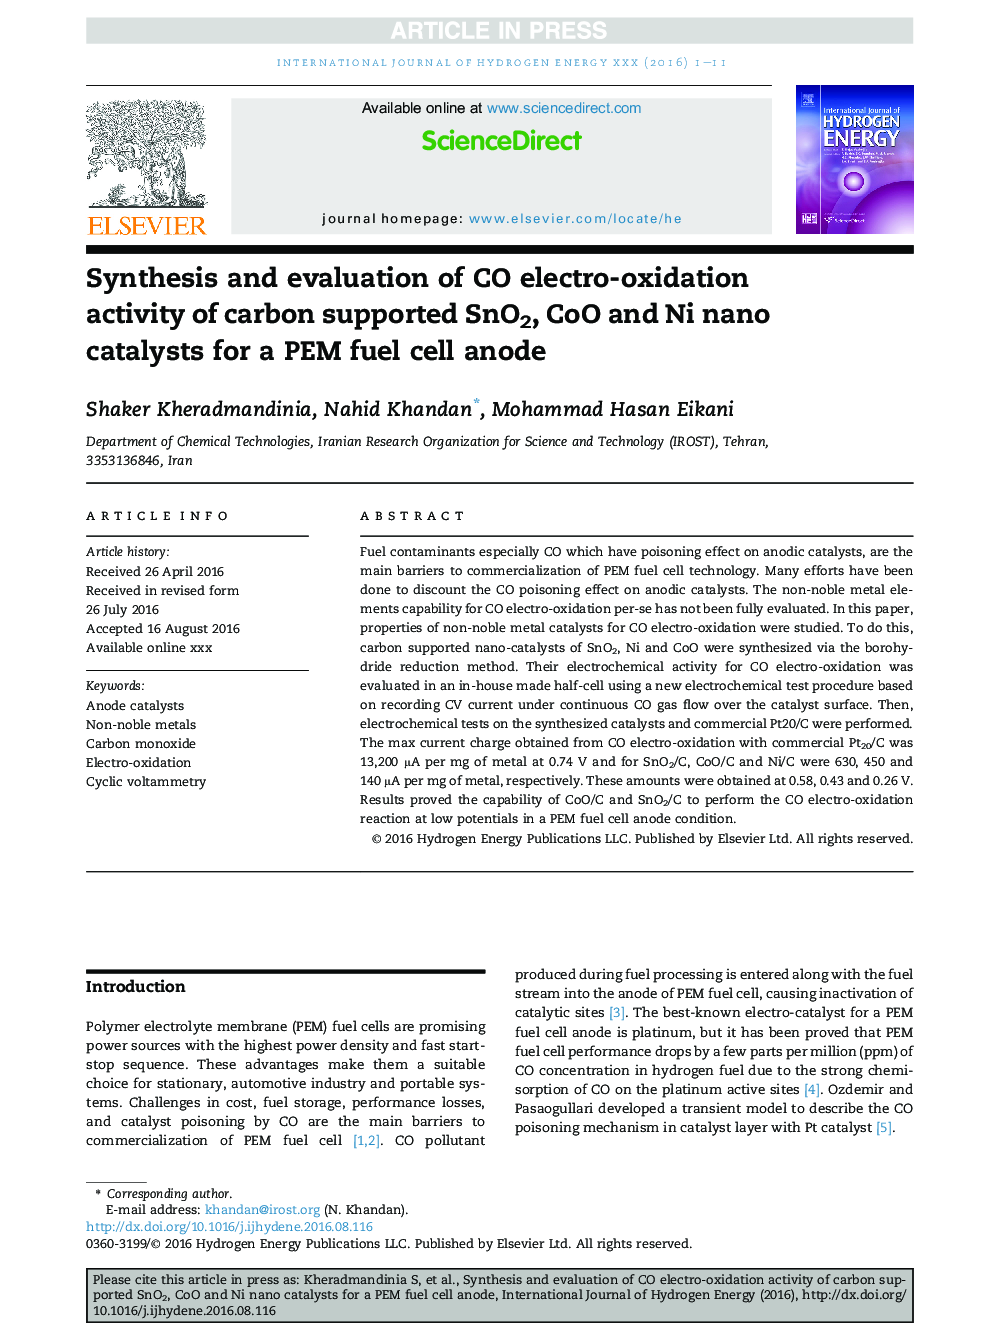 Synthesis and evaluation of CO electro-oxidation activity of carbon supported SnO2, CoO and Ni nano catalysts for a PEM fuel cell anode